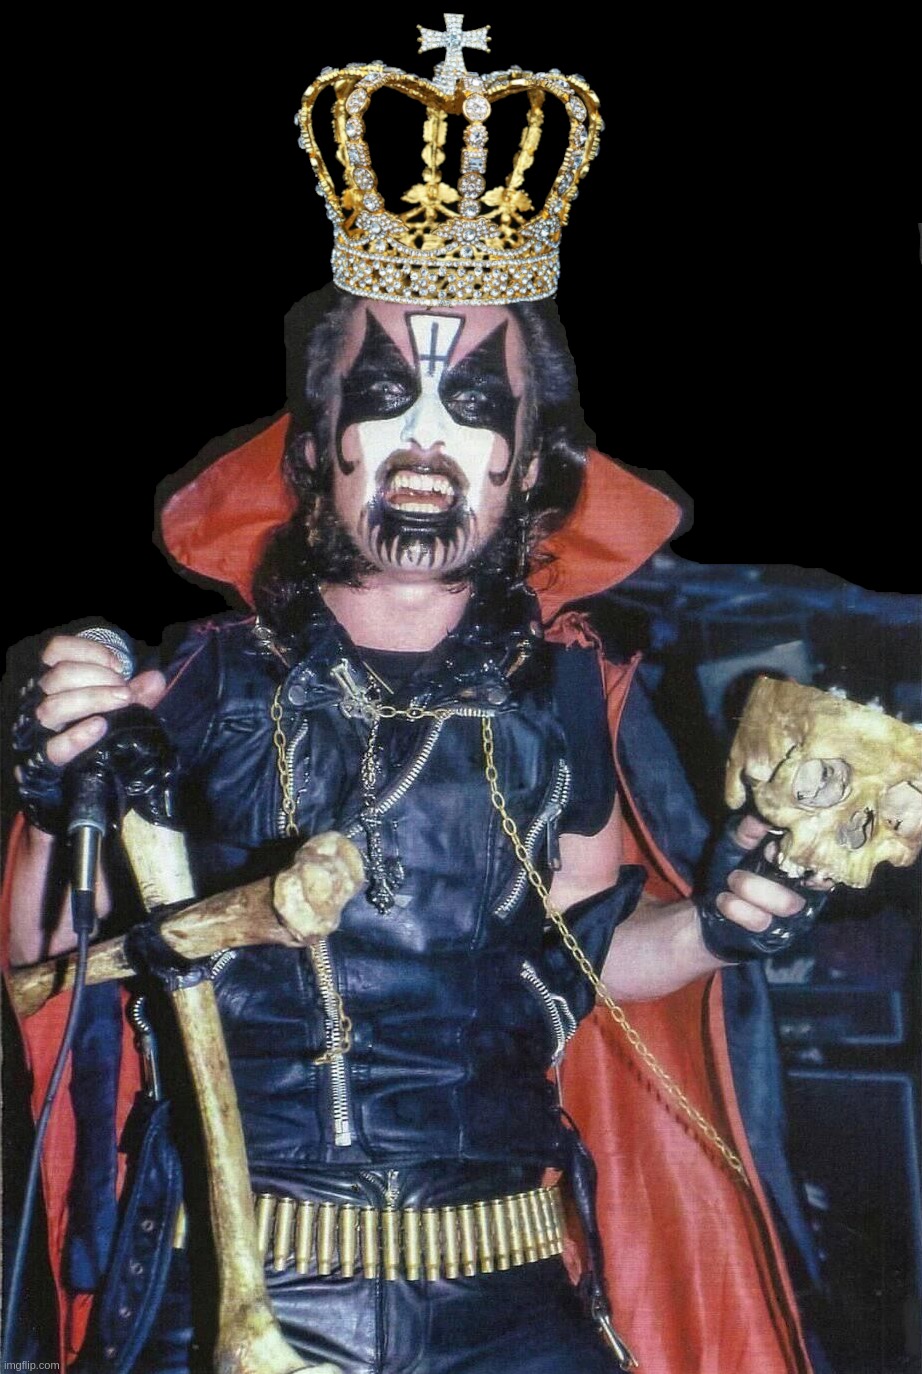 Queen of King Diamond | image tagged in queen,king,diamond,denmark,britain,crown | made w/ Imgflip meme maker